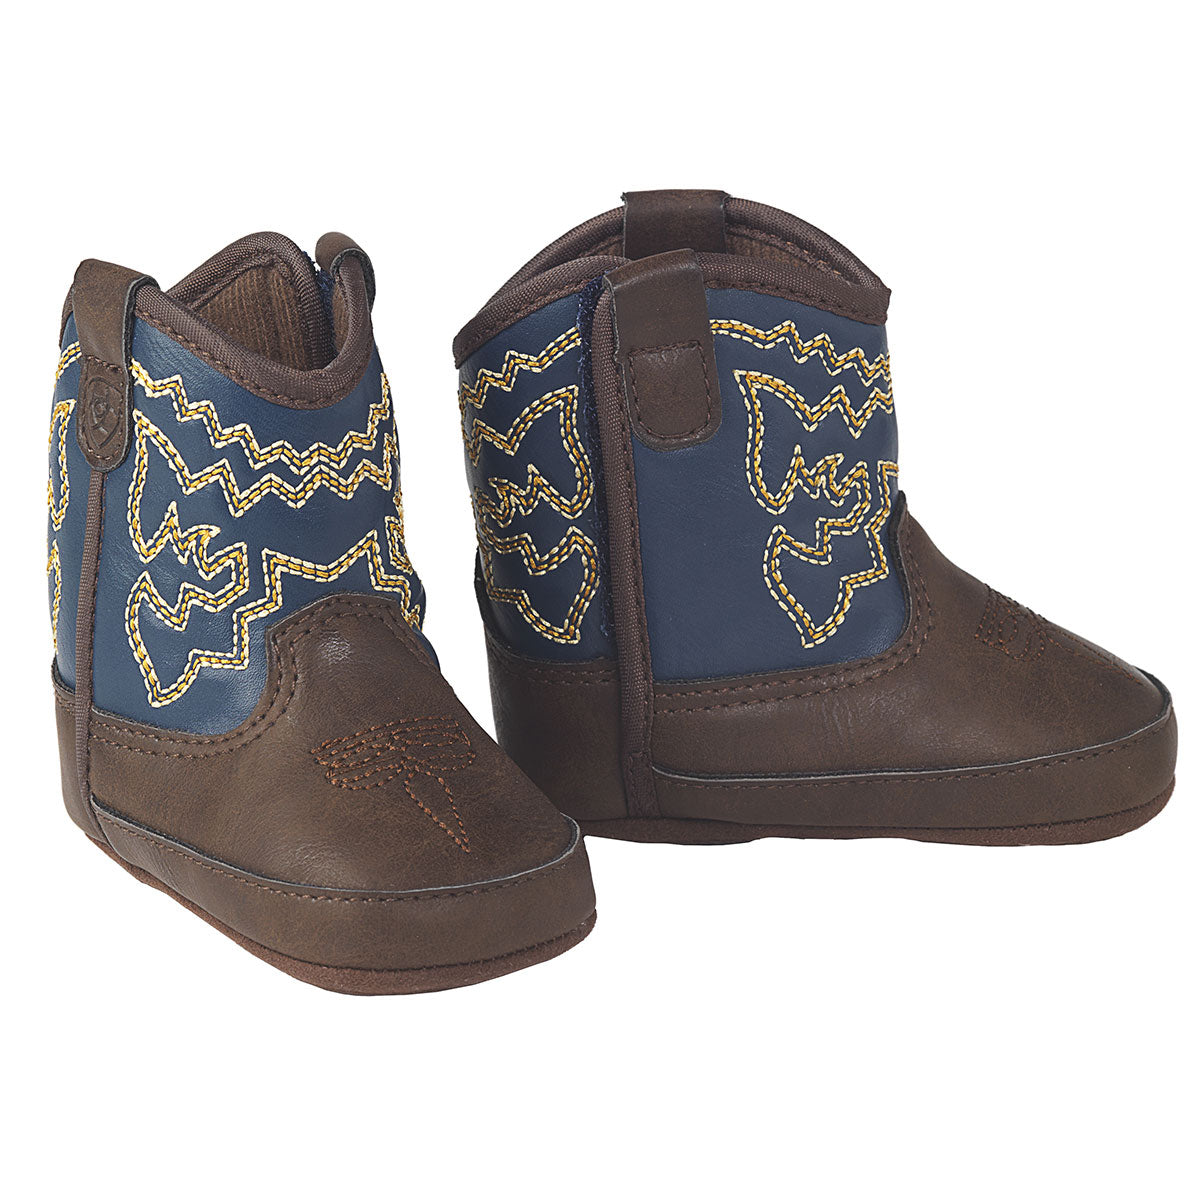 ARIAT LIL' STOMPERS "DEADWOOD" INFANT BOOTS